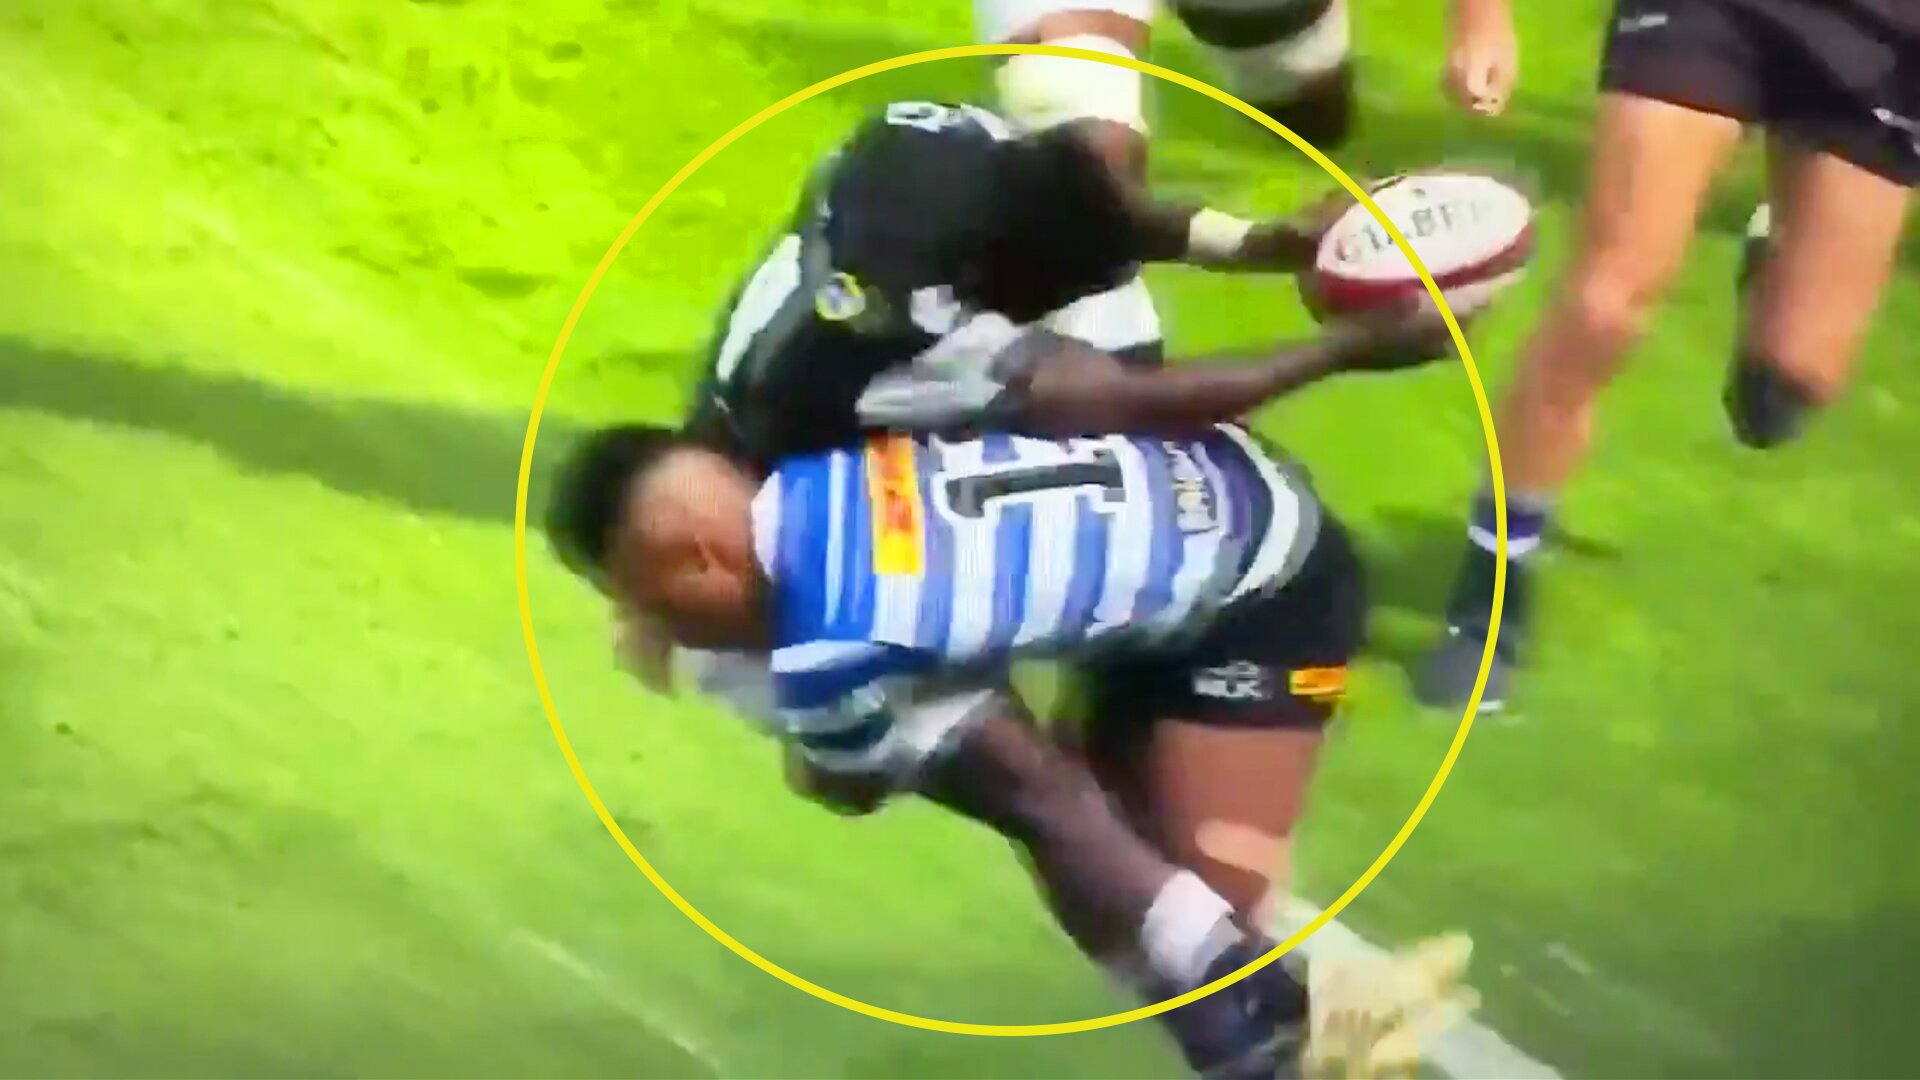 South African rugby player's soul is vanquished in earth shattering Currie Cup war hit